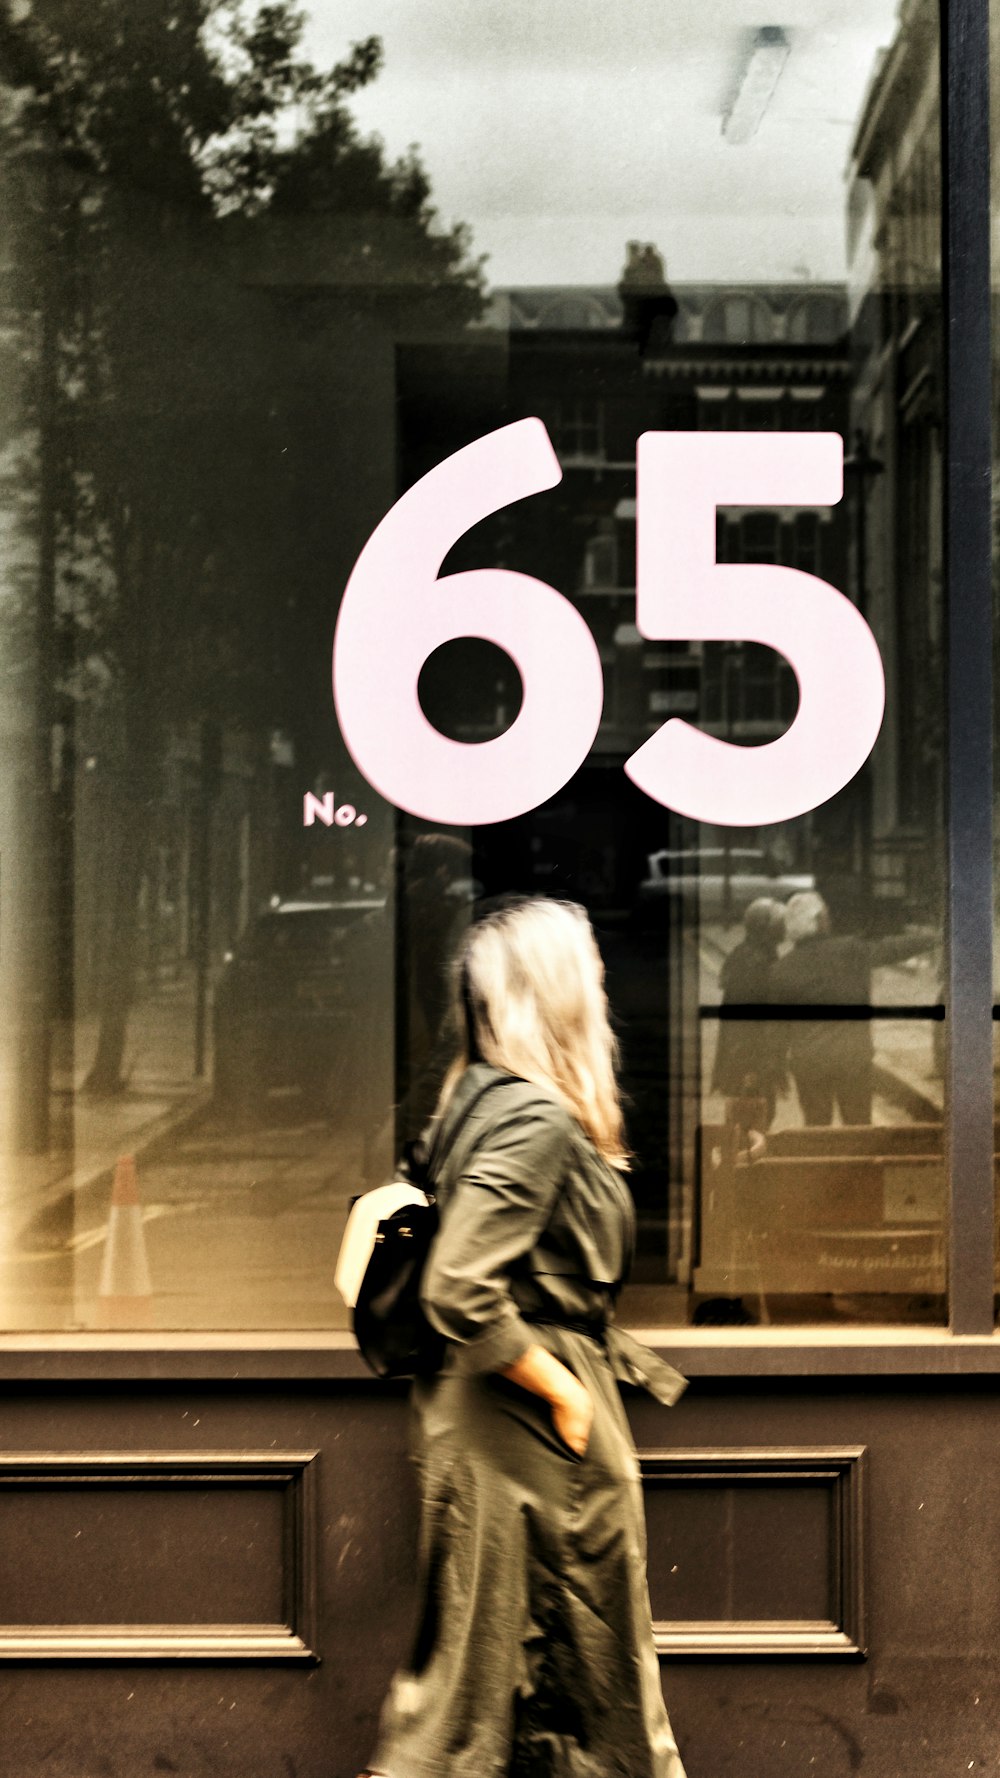 a woman walking past a window with a sign in the window